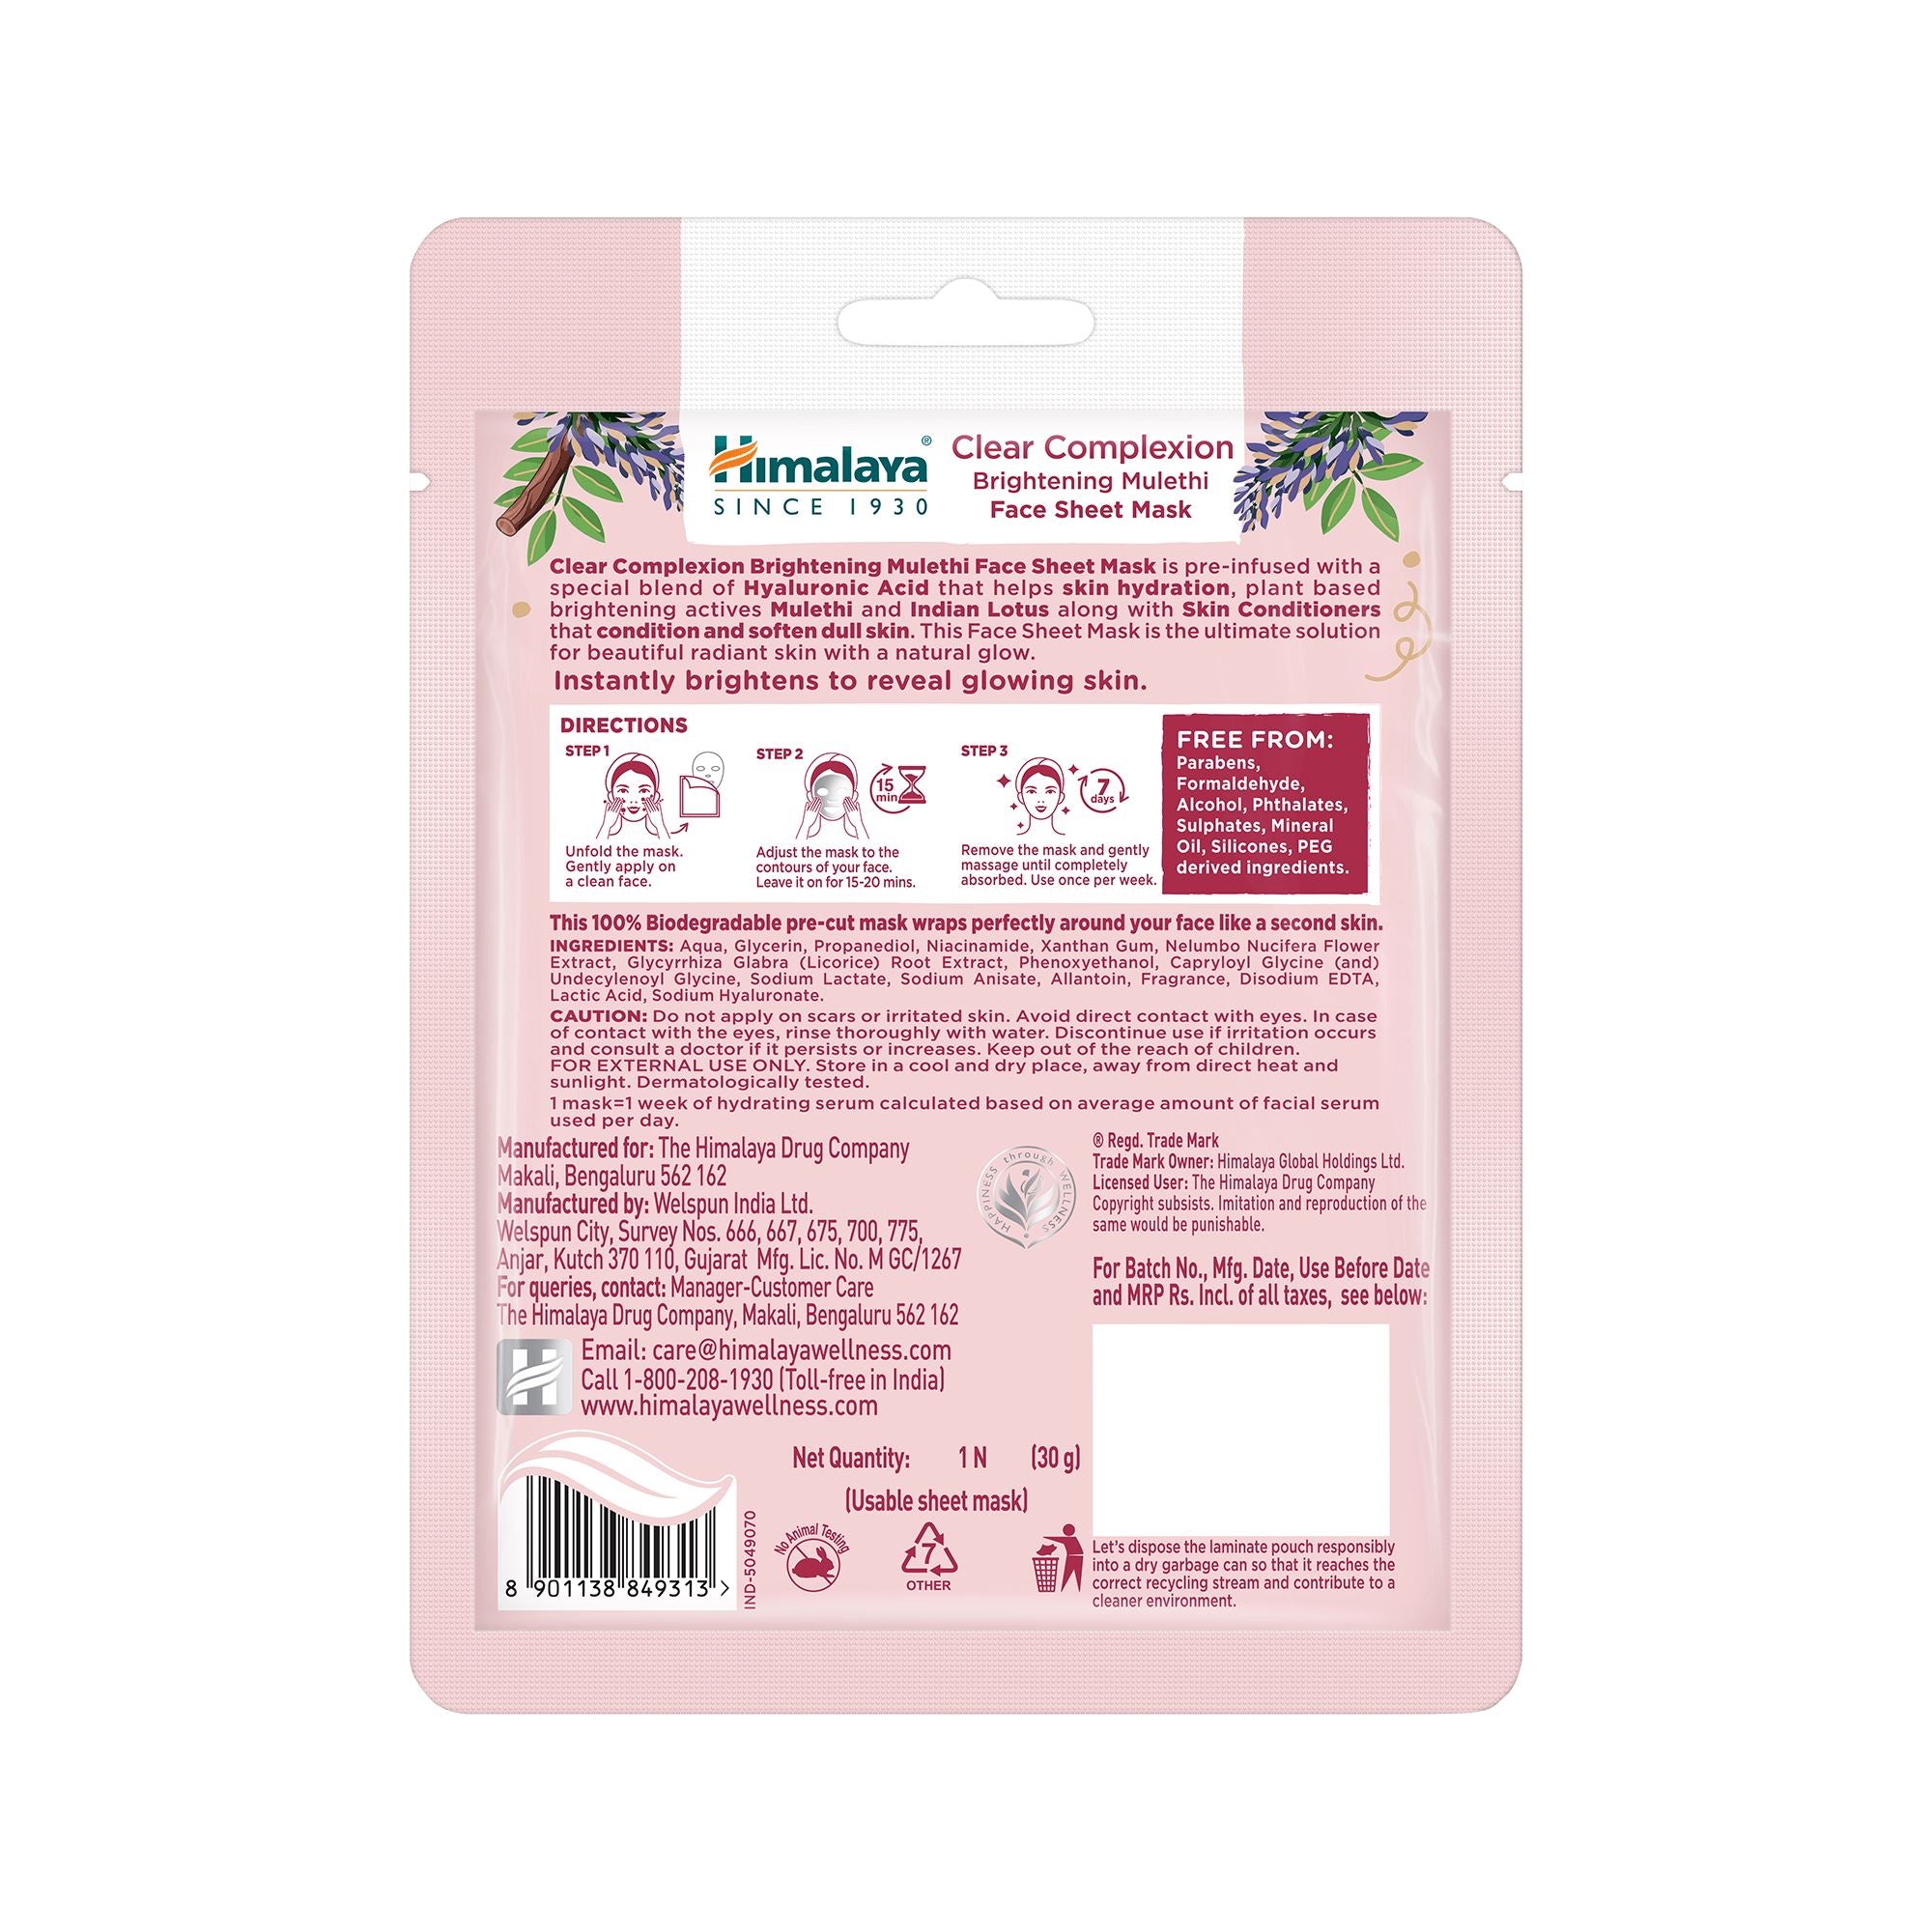 Himalaya Clear Complexion Brightening Mulethi Face Sheet Mask Ingredients